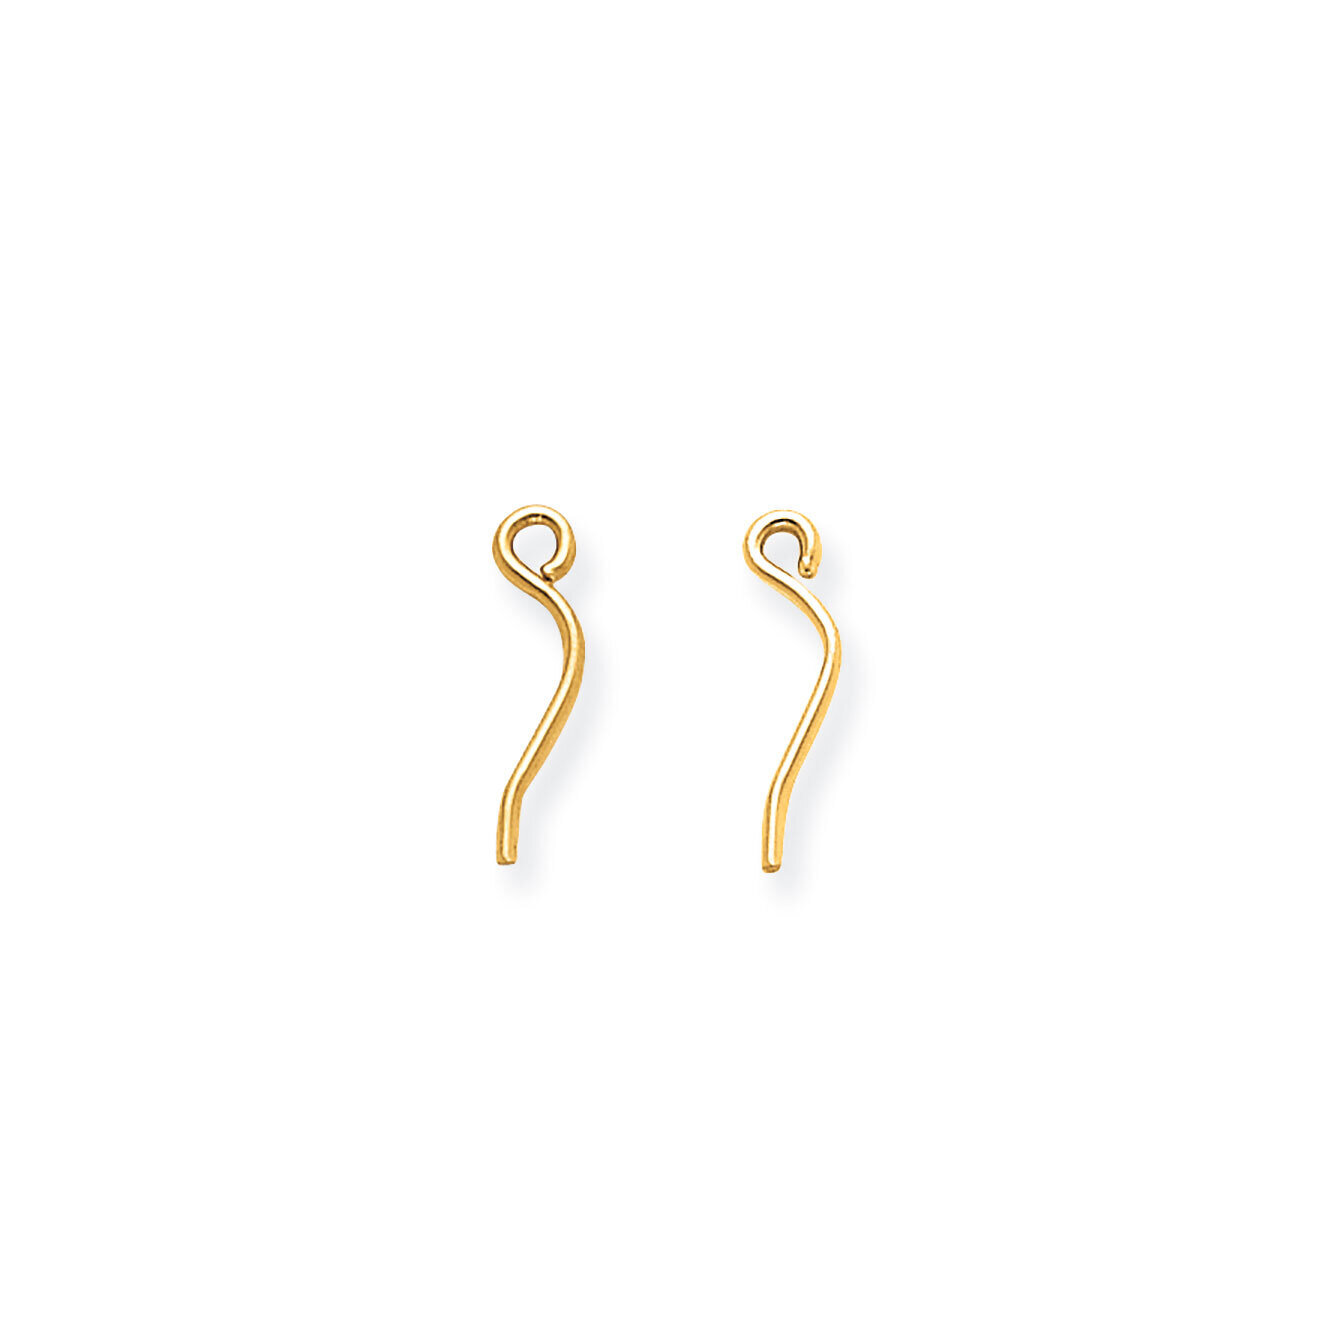 11mm Curved Earring Replacement Wire Component 14k Yellow Gold YG2720